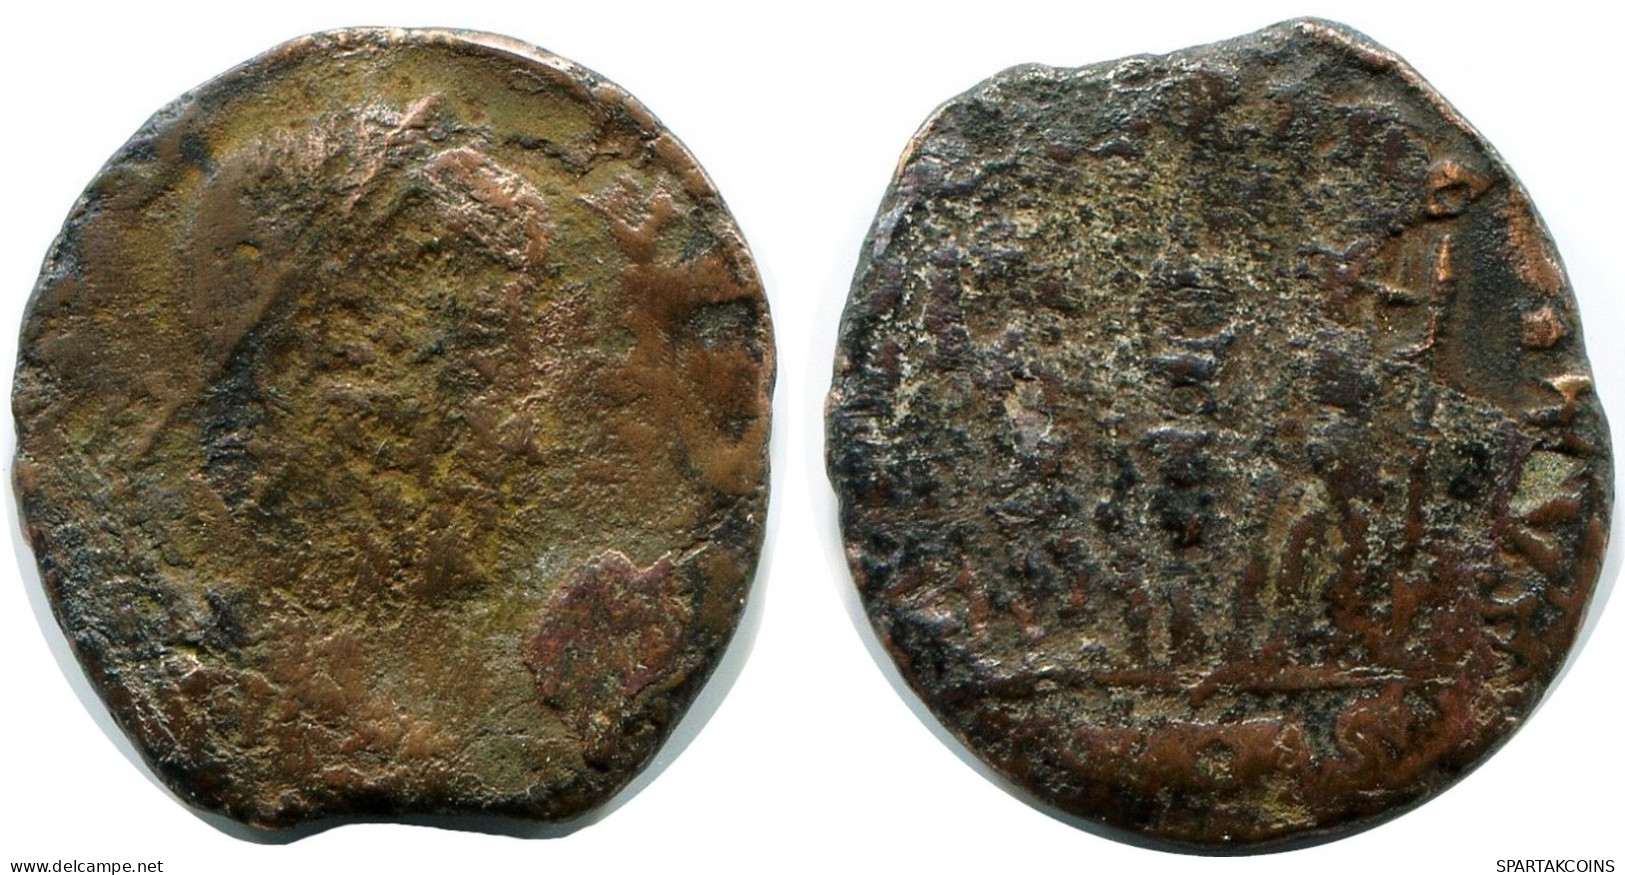 CONSTANS MINTED IN CYZICUS FOUND IN IHNASYAH HOARD EGYPT #ANC11677.14.D.A - El Imperio Christiano (307 / 363)